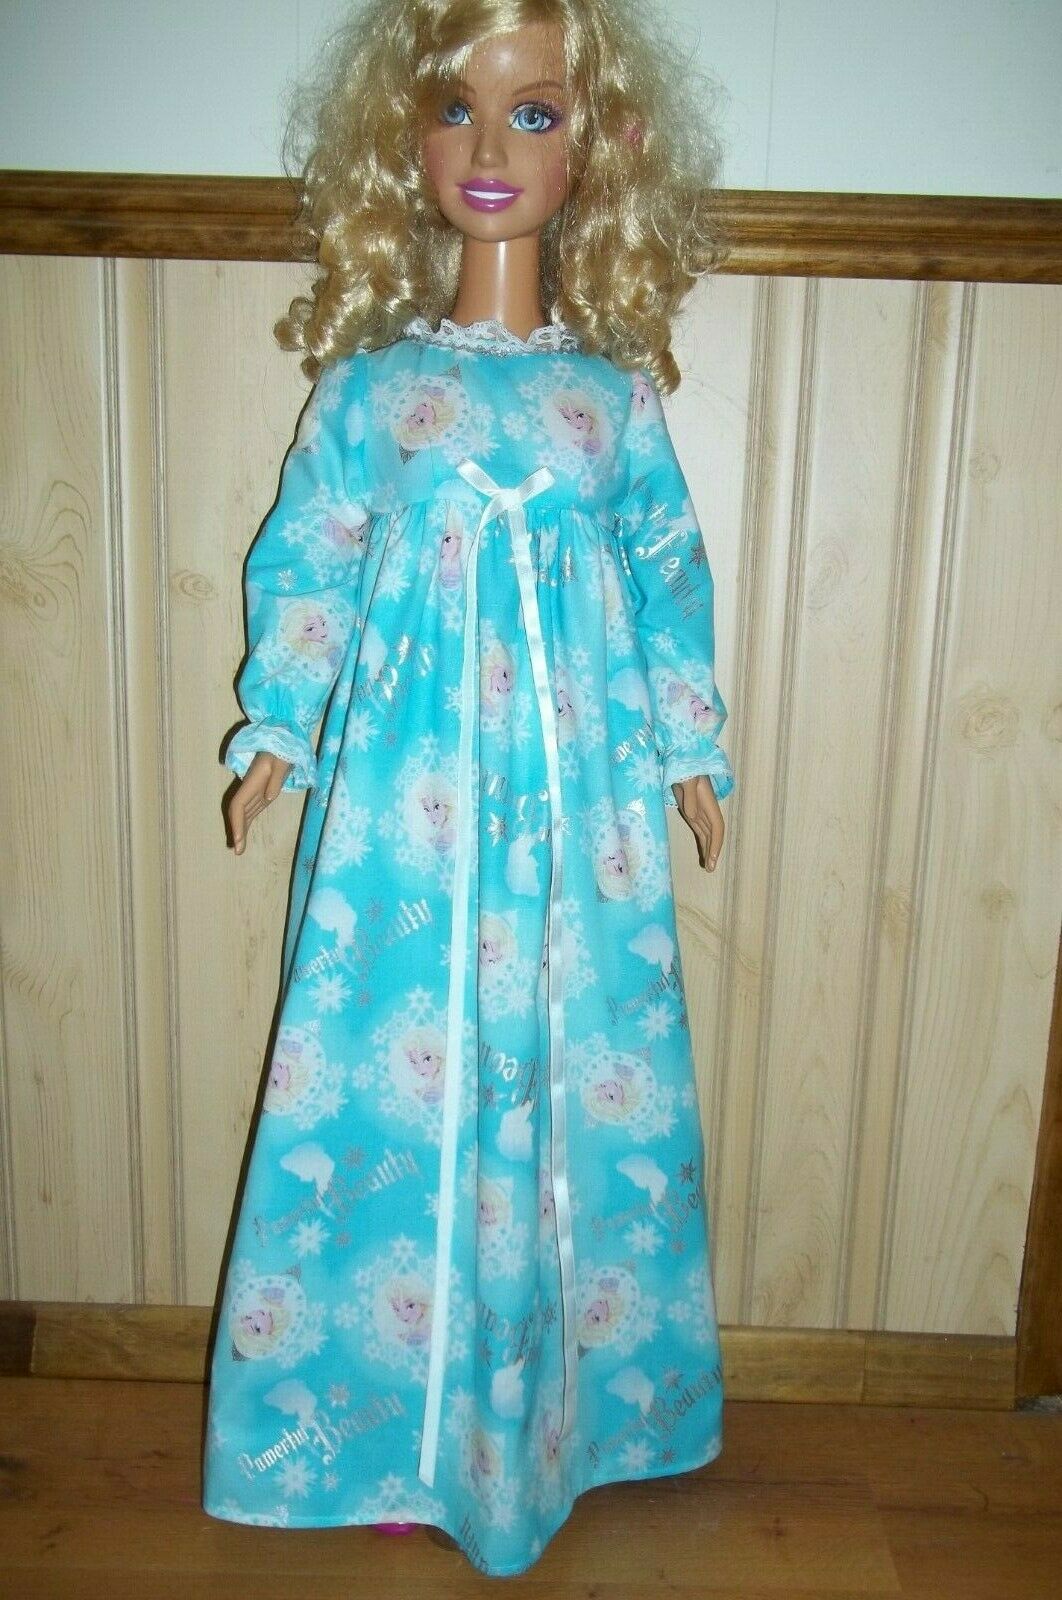 Elsa Print Nightgown Clothes For 36" My Size Barbie Doll Or 38" Elsa Or Anna